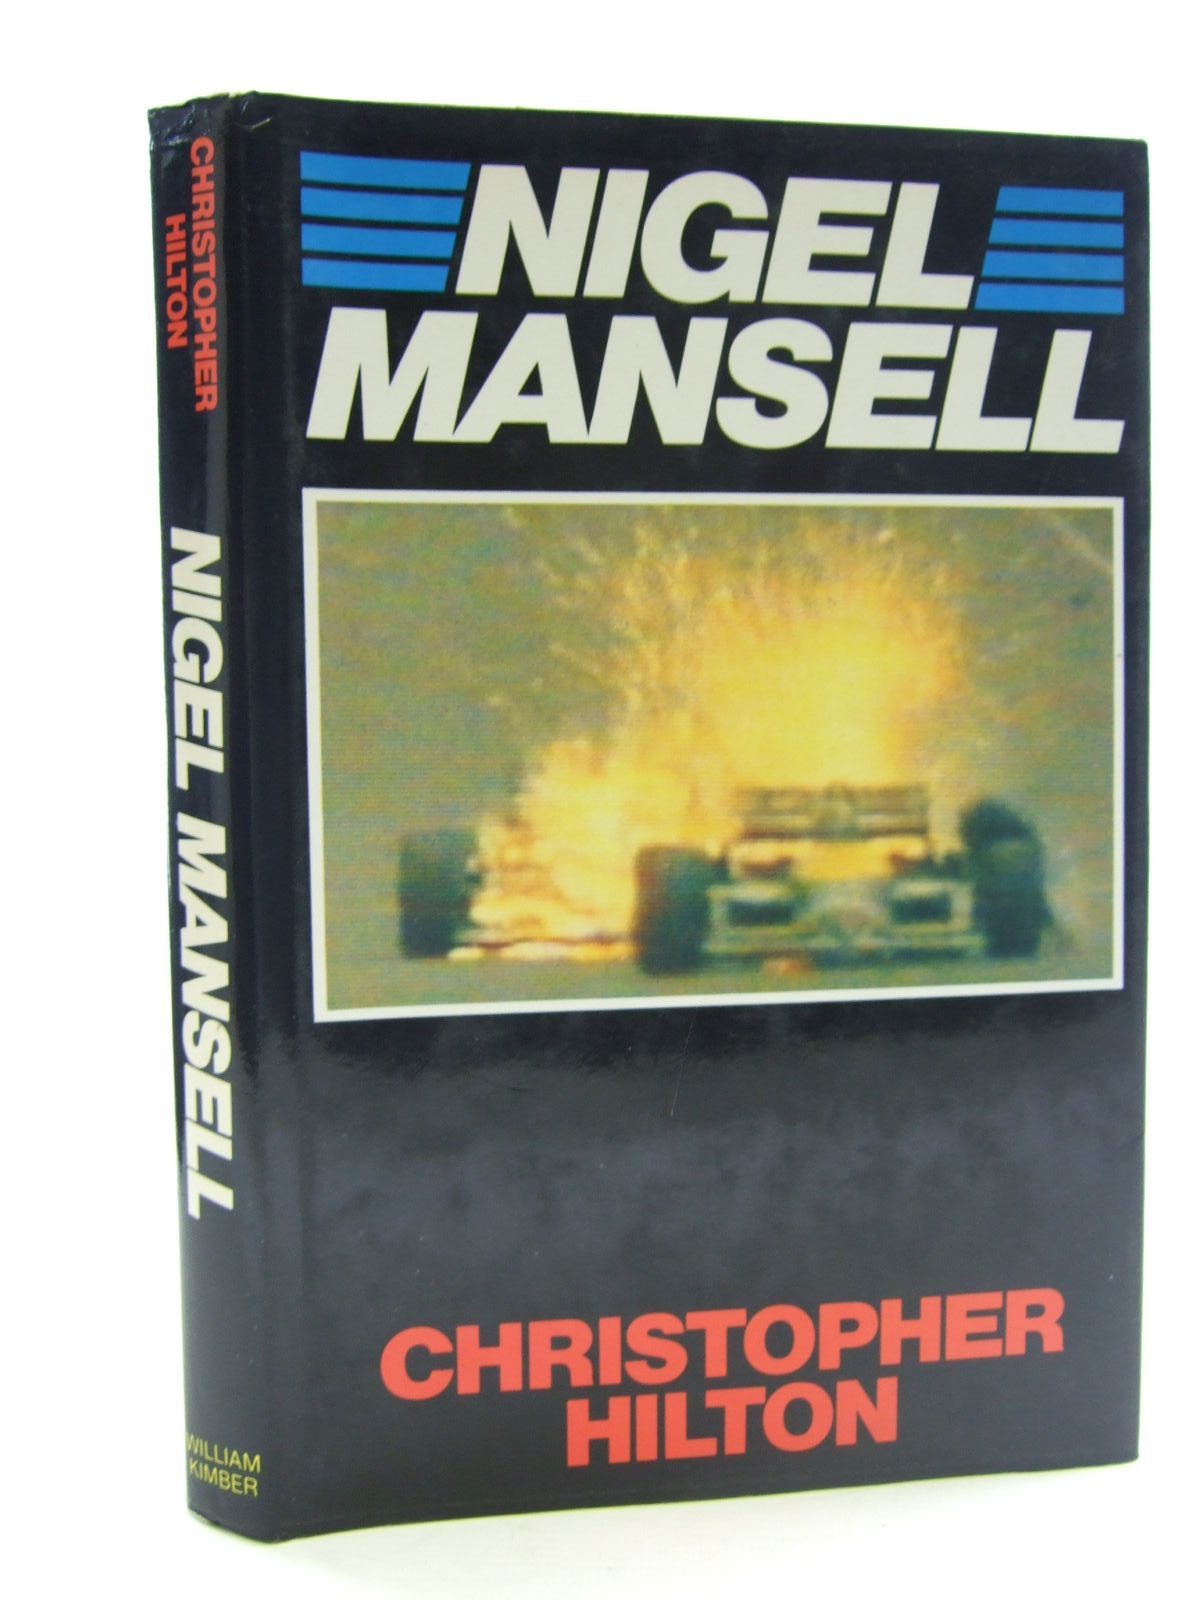 Photo of NIGEL MANSELL written by Hilton, Christopher published by William Kimber (STOCK CODE: 2107367)  for sale by Stella & Rose's Books